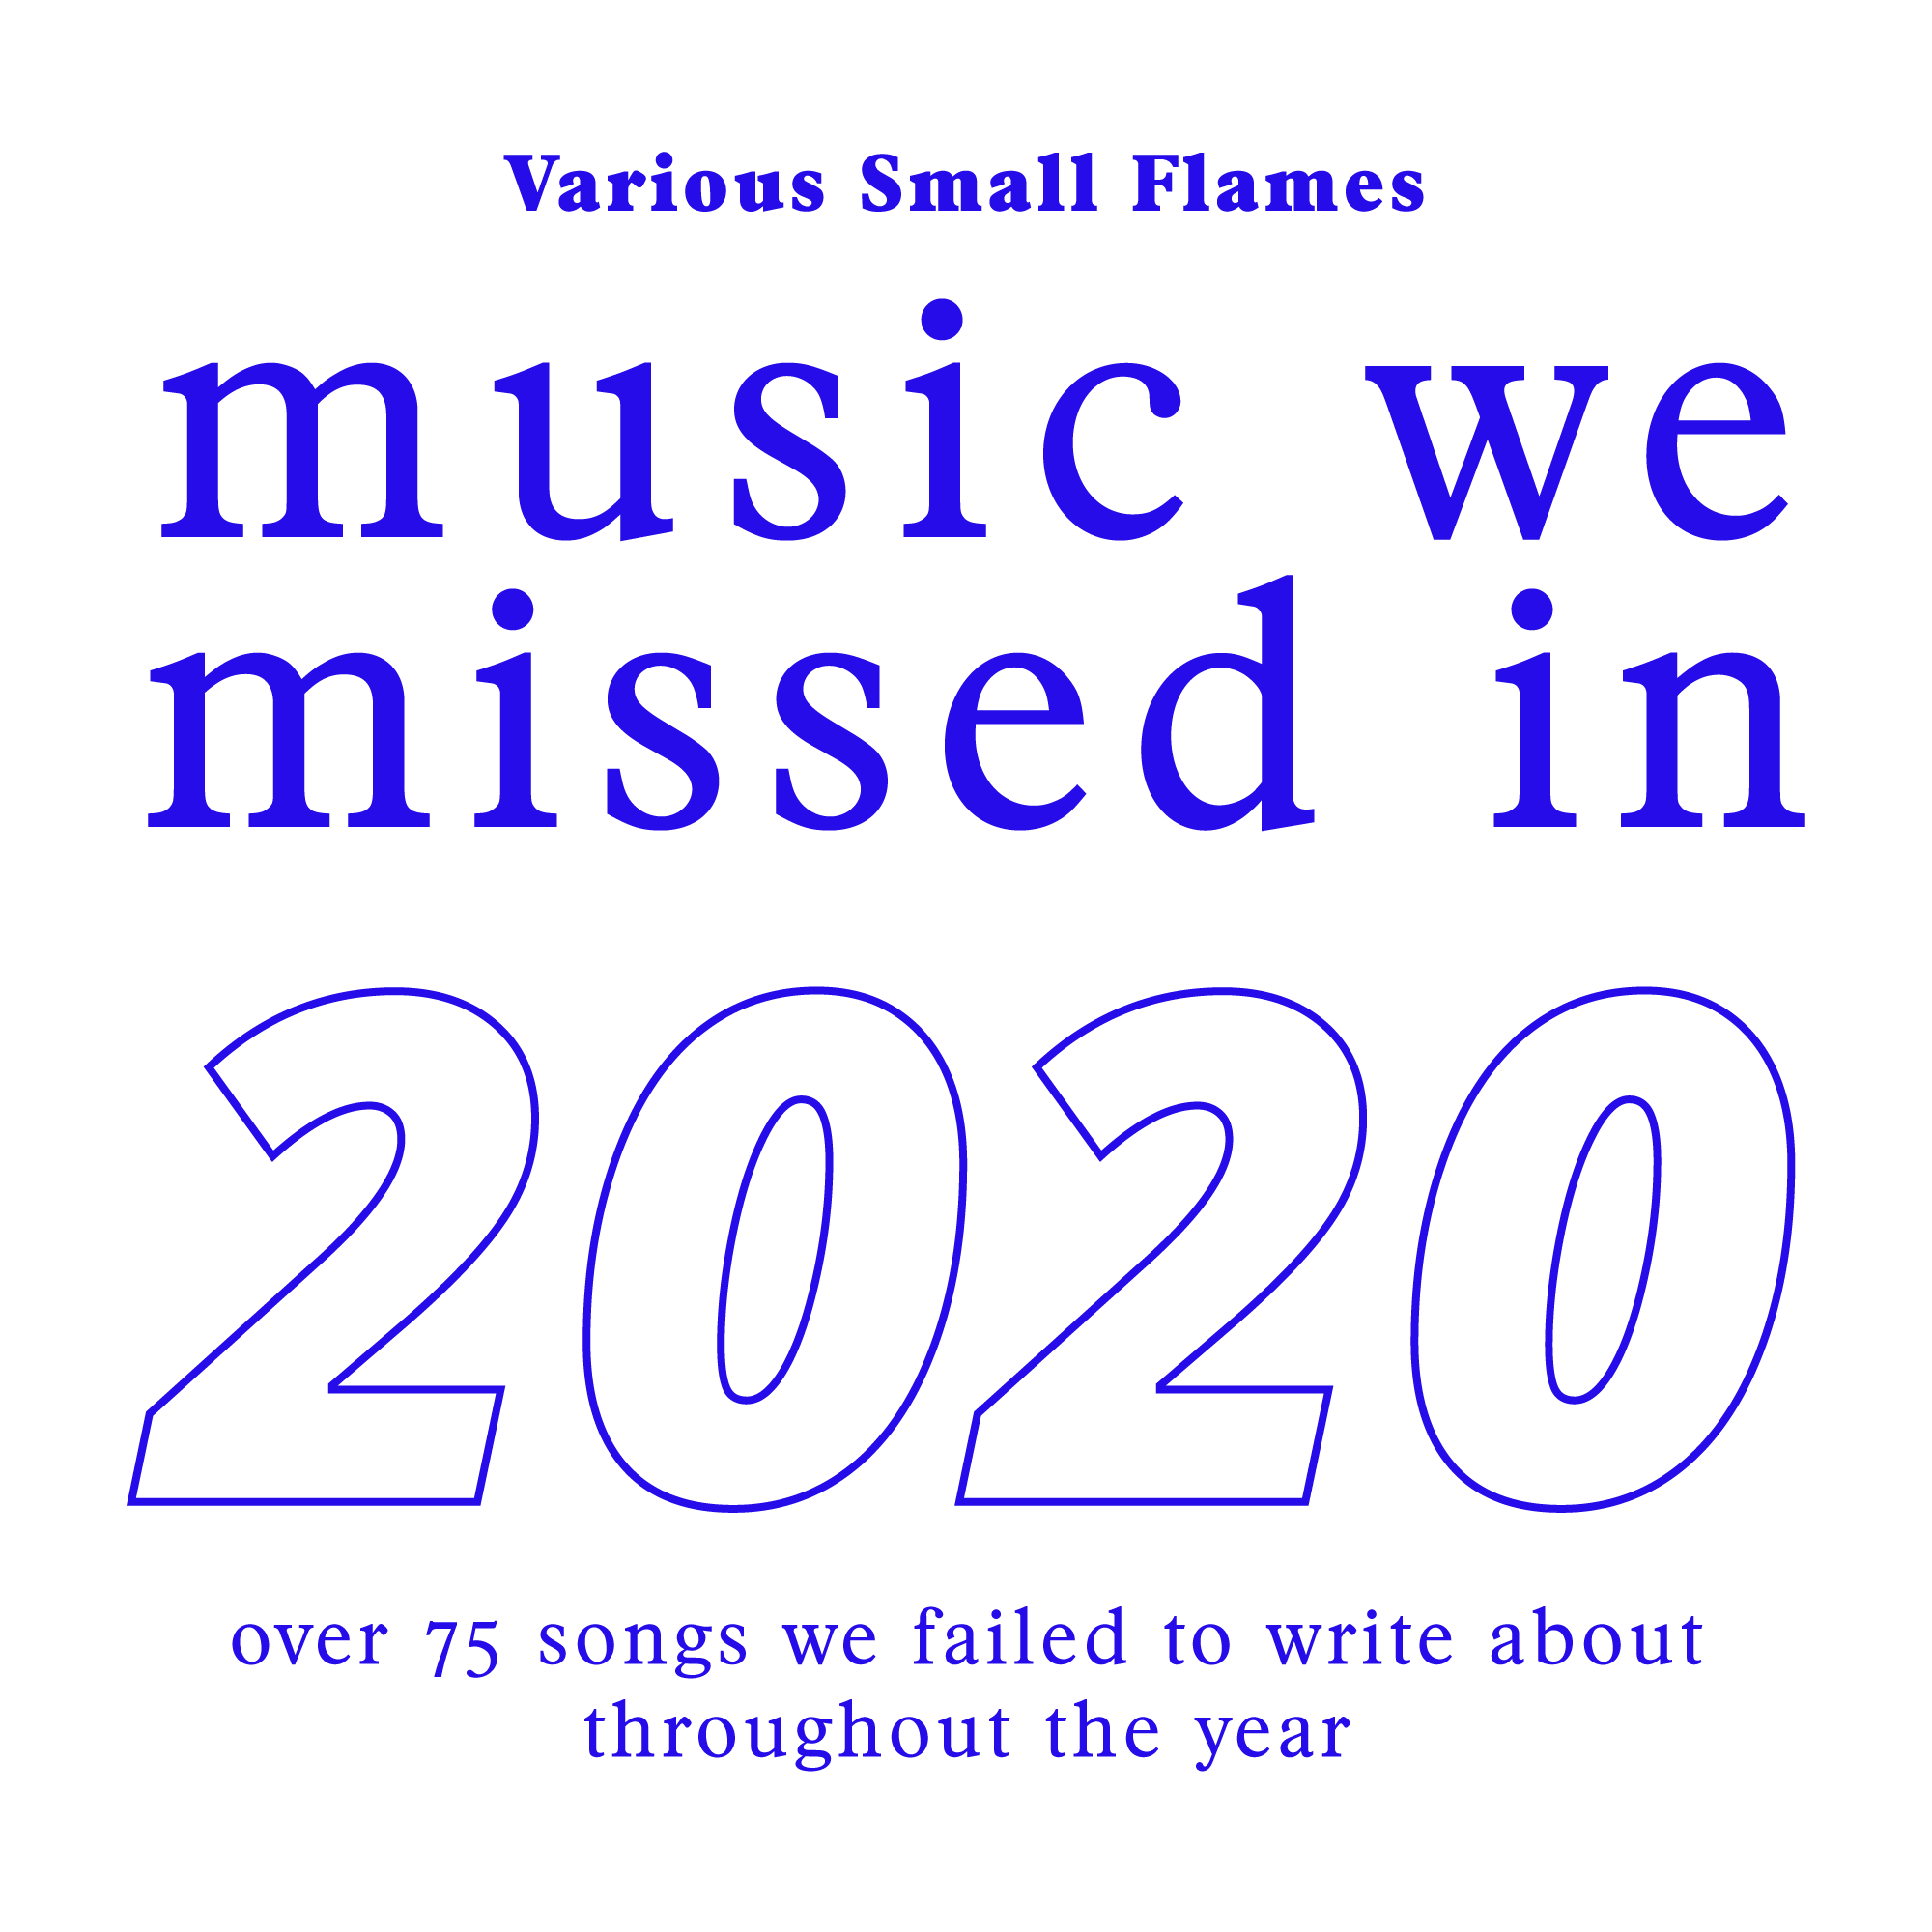 text reading music we missed in 2020